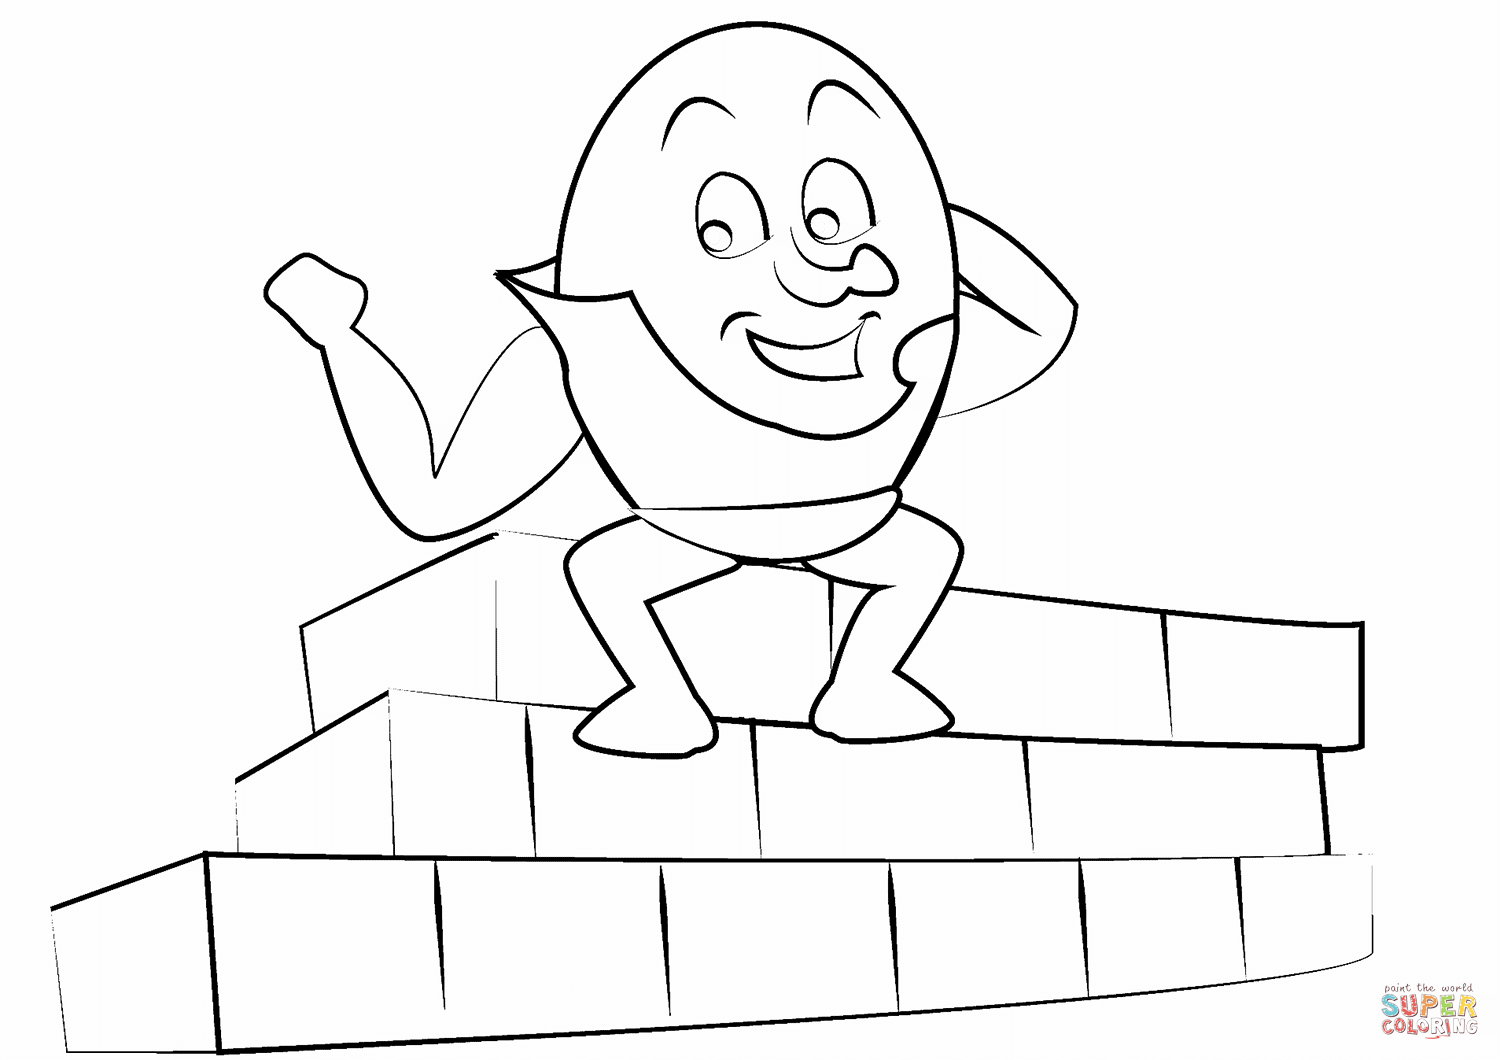 Humpty Dumpty Coloring Page | Free Printable Coloring Pages - Printable Humpty Dumpty Puzzle